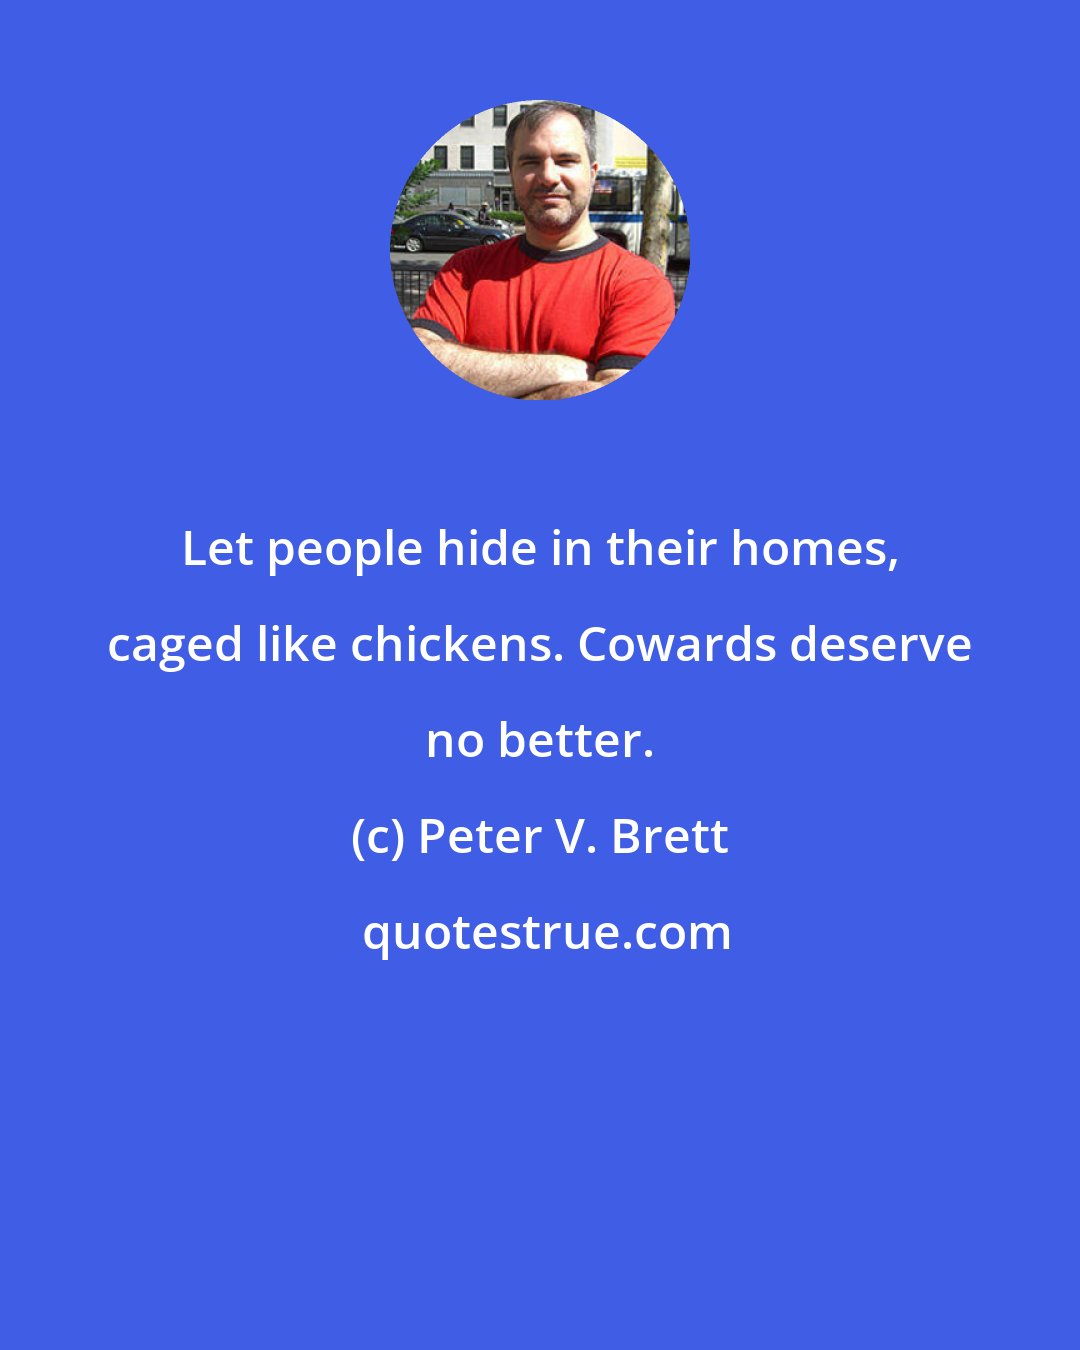 Peter V. Brett: Let people hide in their homes, caged like chickens. Cowards deserve no better.